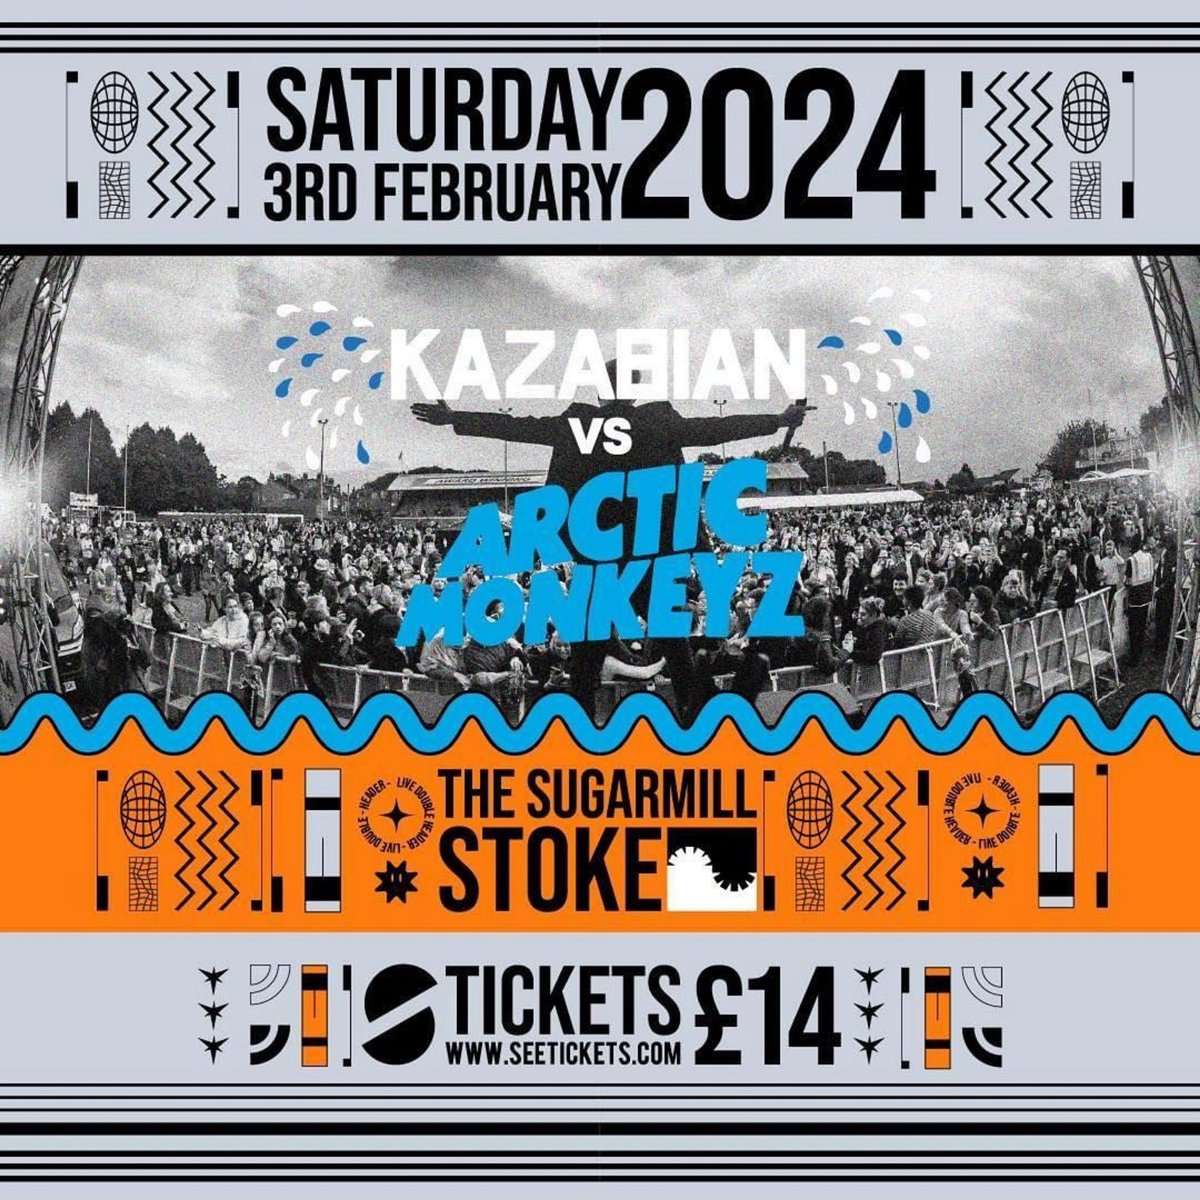 **SATURDAY** The Sugarmill plays host to the epic Kazabian vs Arctic Monkeyz tribute show ~ Saturday 3rd February ‘24🎸 This extravaganza never fails to impress, and is one of our favorite shows of the year 🗓️💕 Book tickets now - thesugarmill.co.uk 🧑‍💻🎟